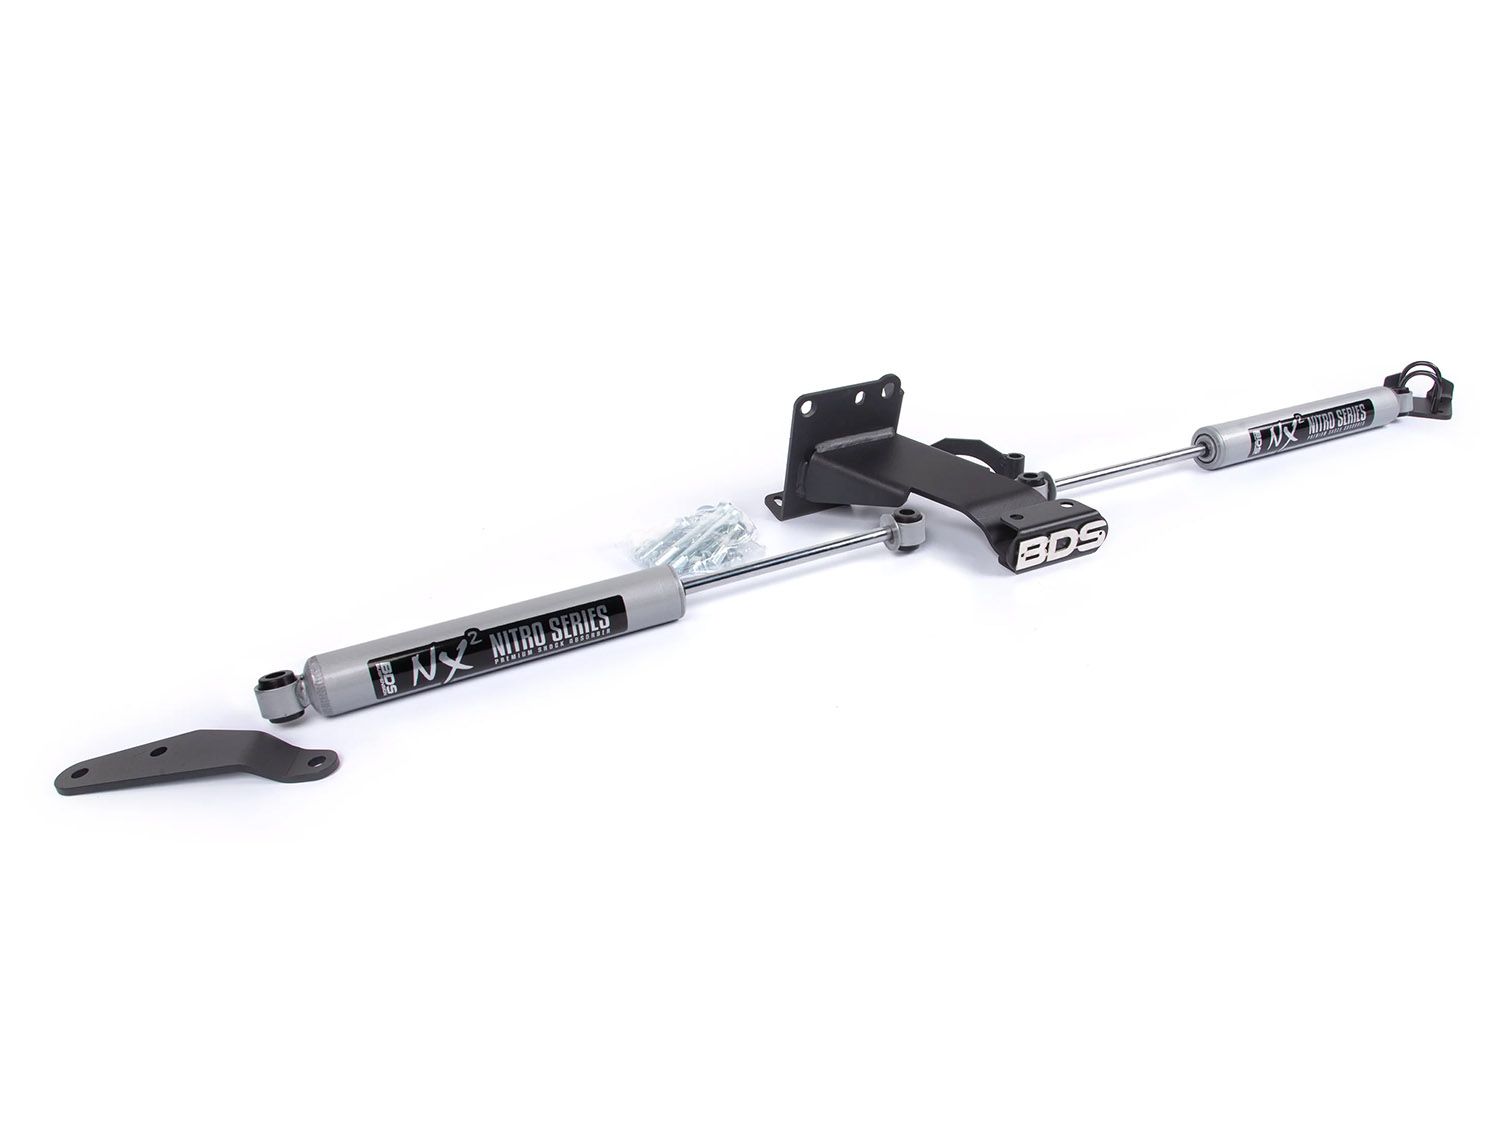 Ram 2500 2014-2018 Dodge 4WD - NX2 Dual Steering Stabilizer by BDS